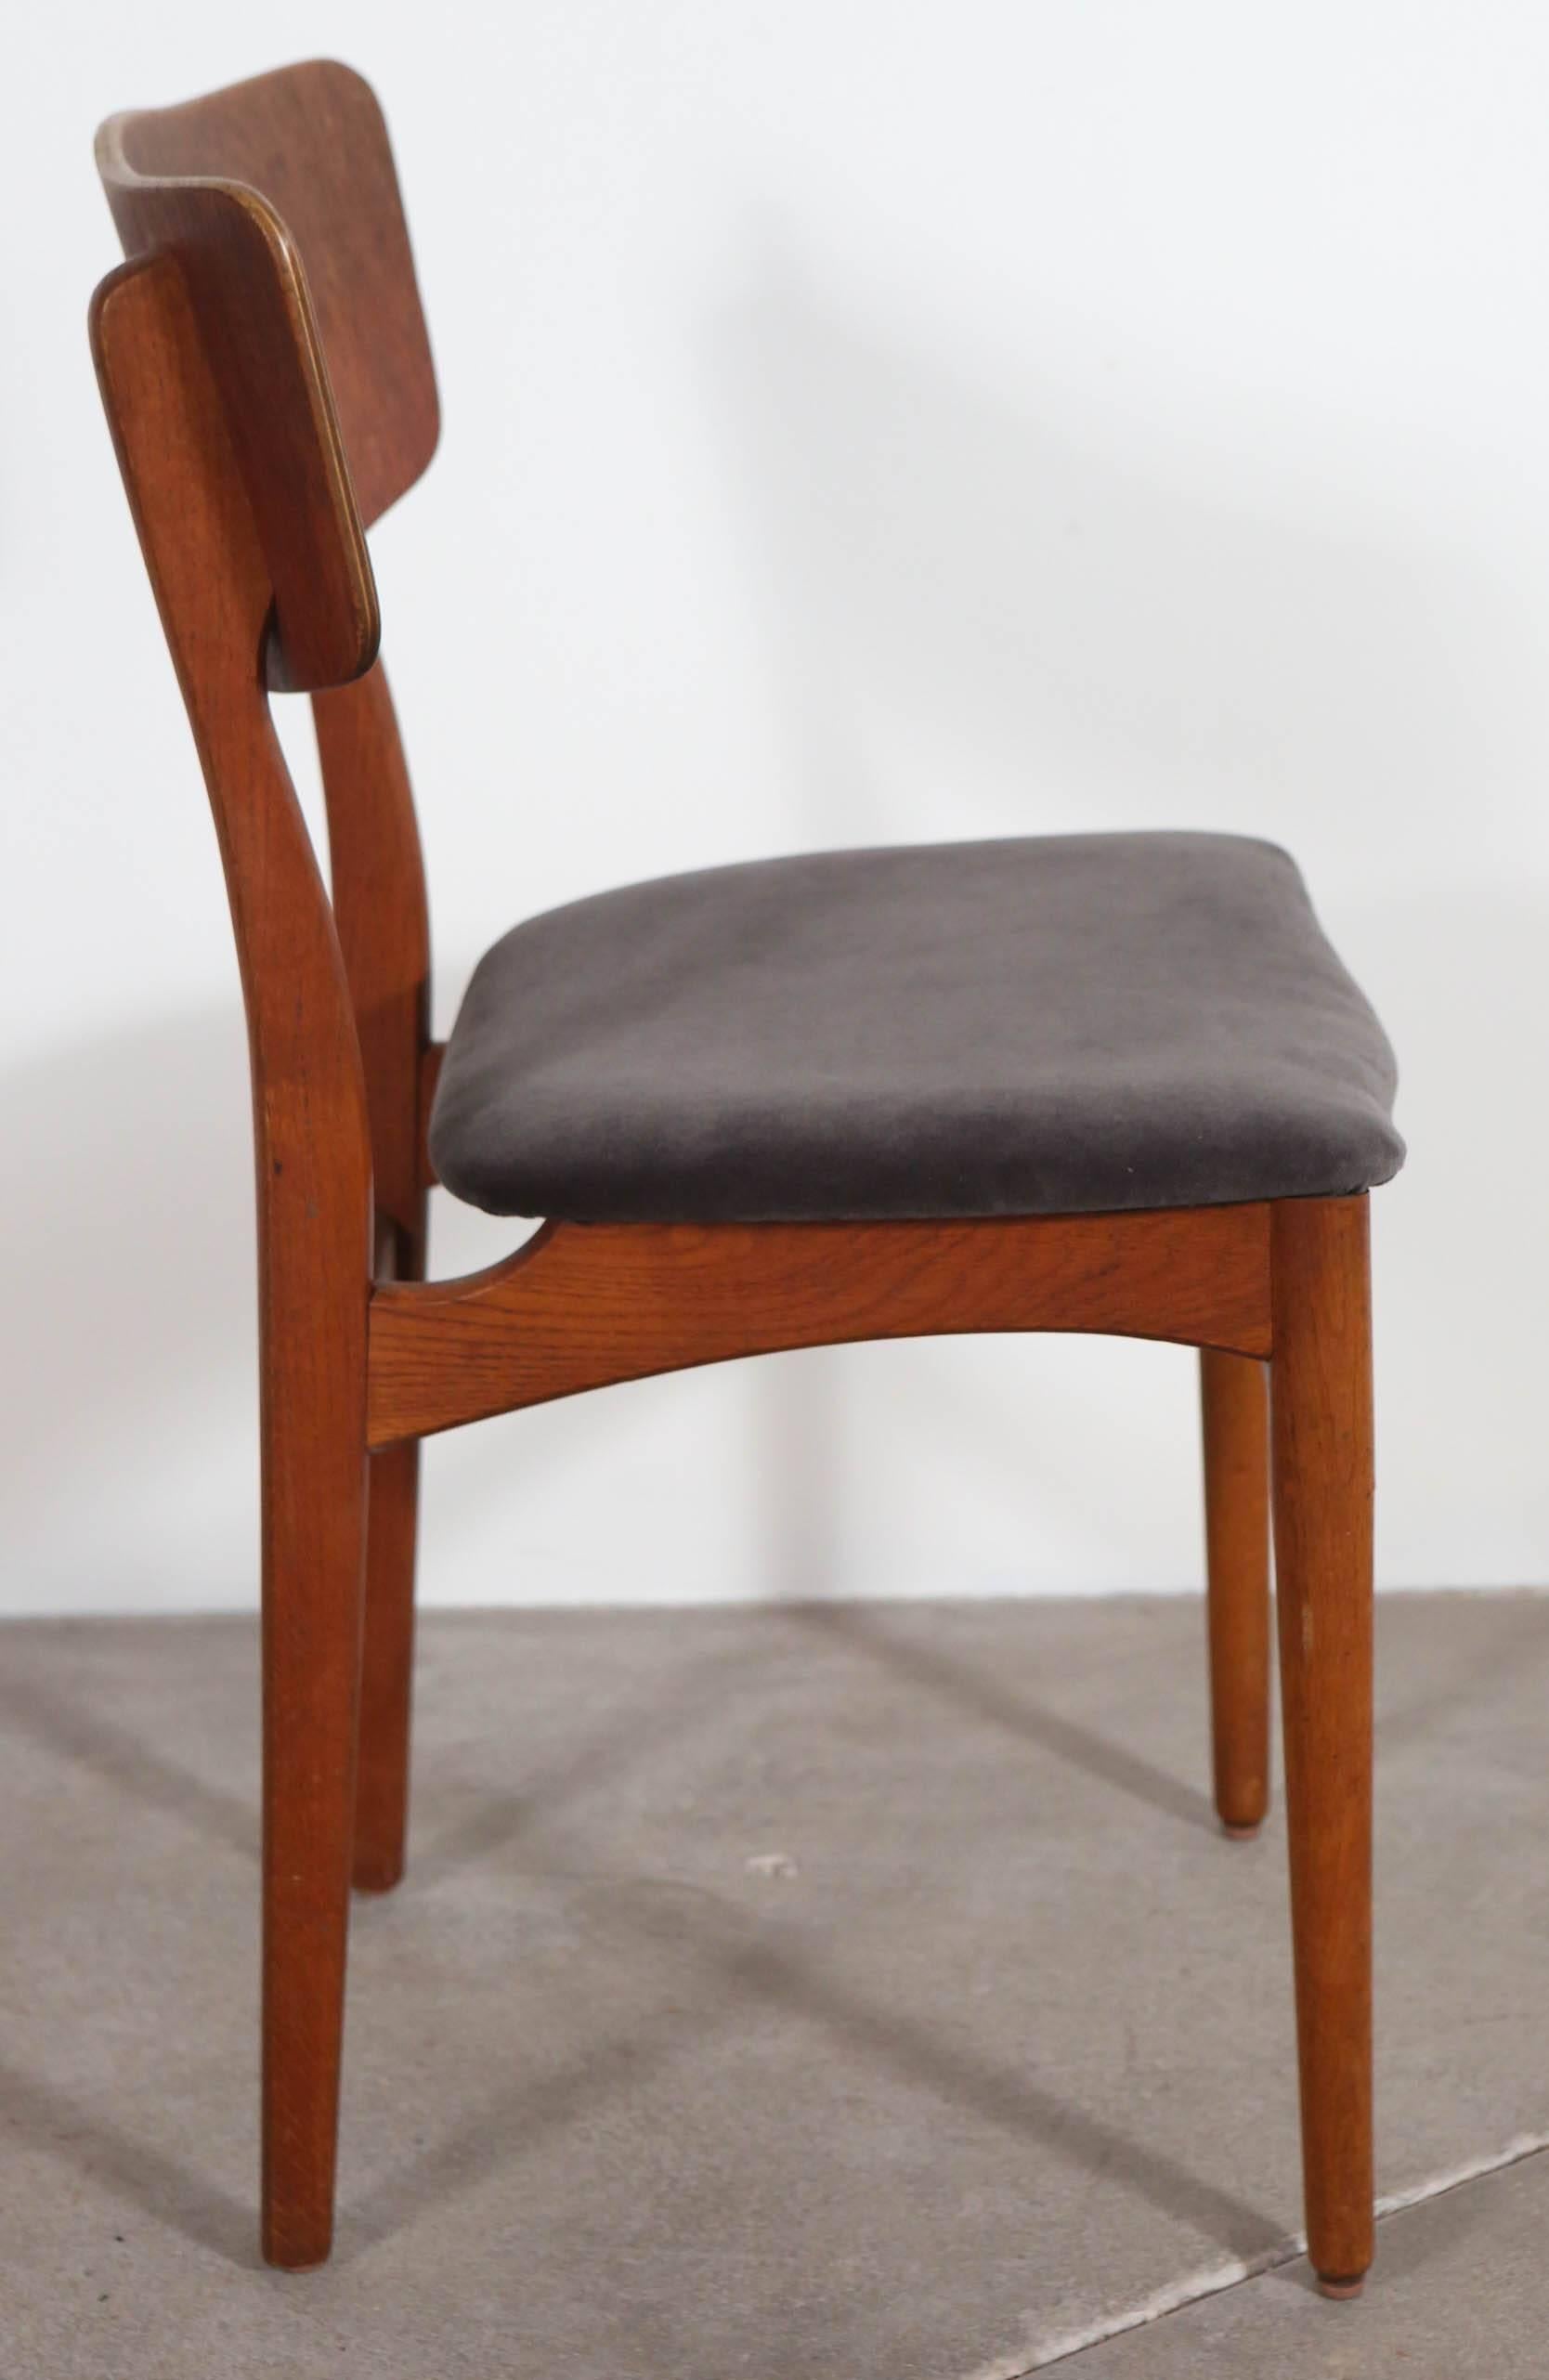 American Mid-Century Teak Framed Dining Chairs with Velvet Seat Cushion